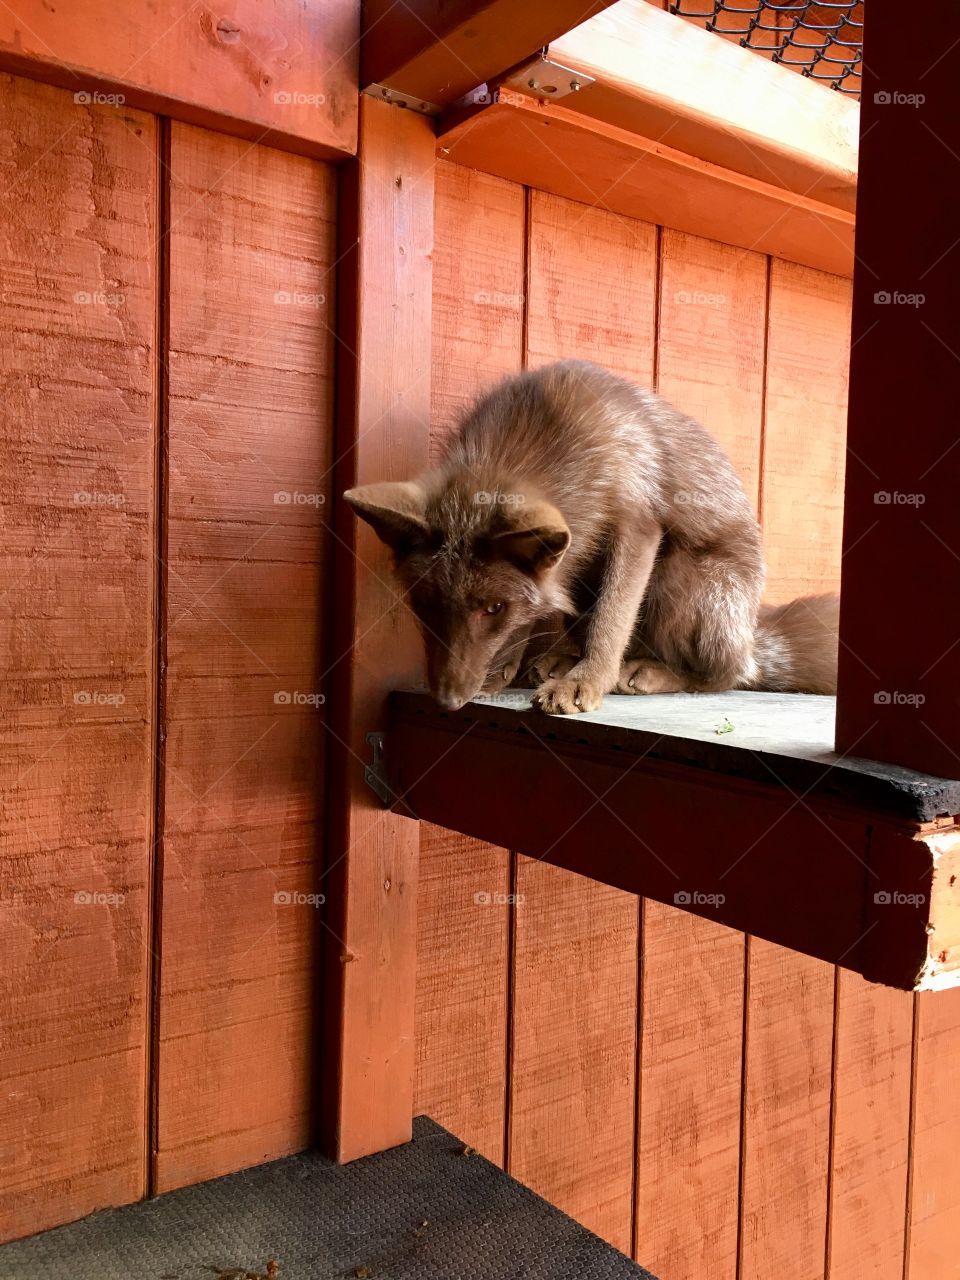 A beautiful designer fox (breed and slaughtered for their fur). She is peering down on her litter mates deciding her next move. She is housed in an orange barn that has been upgraded to house foxes.